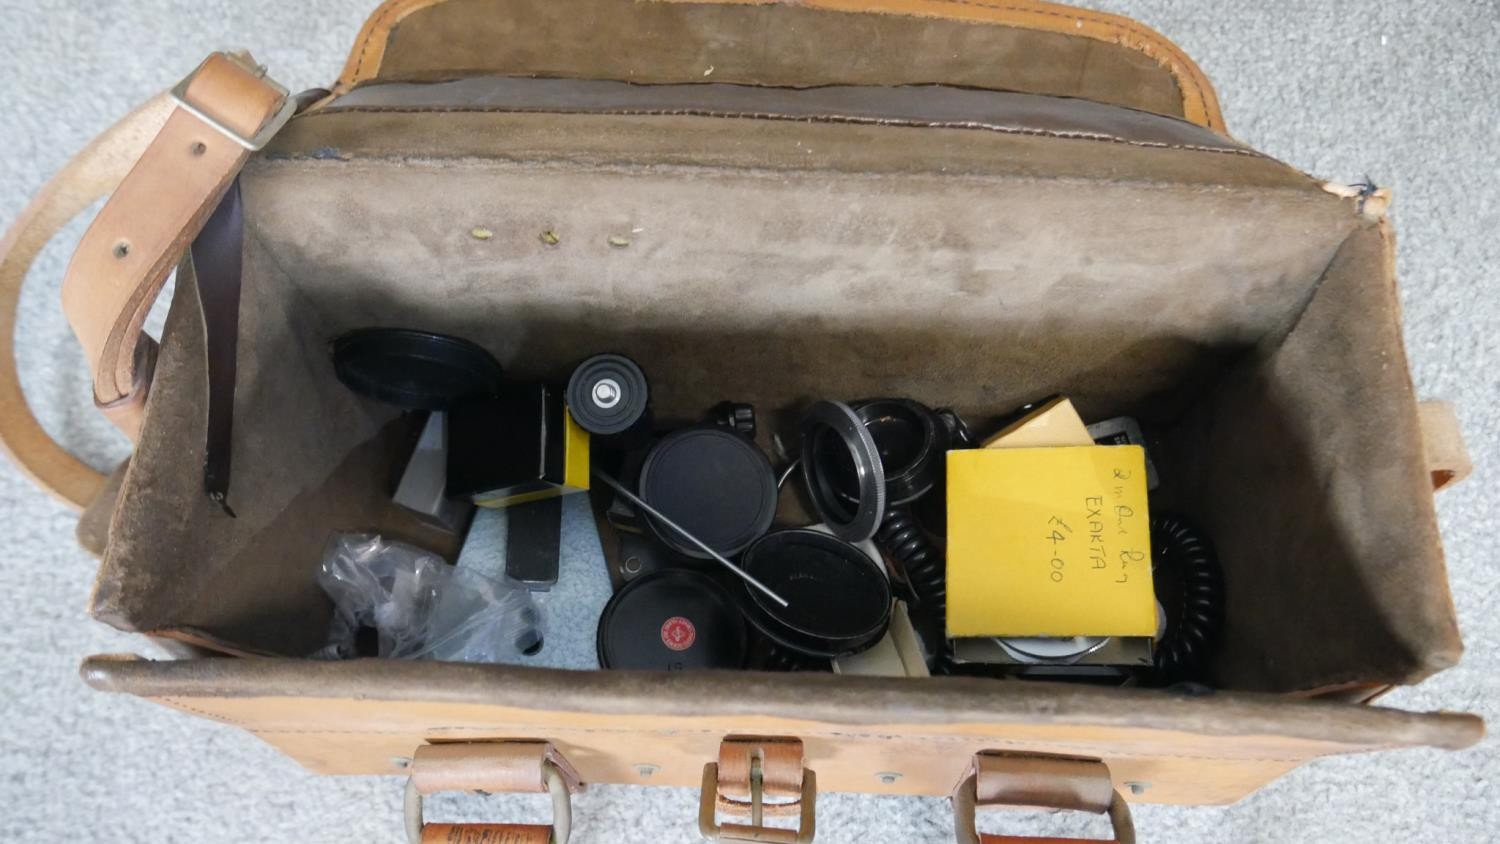 A brown leather shoulder bag containing various lenses and scientific equipment parts for - Image 2 of 4